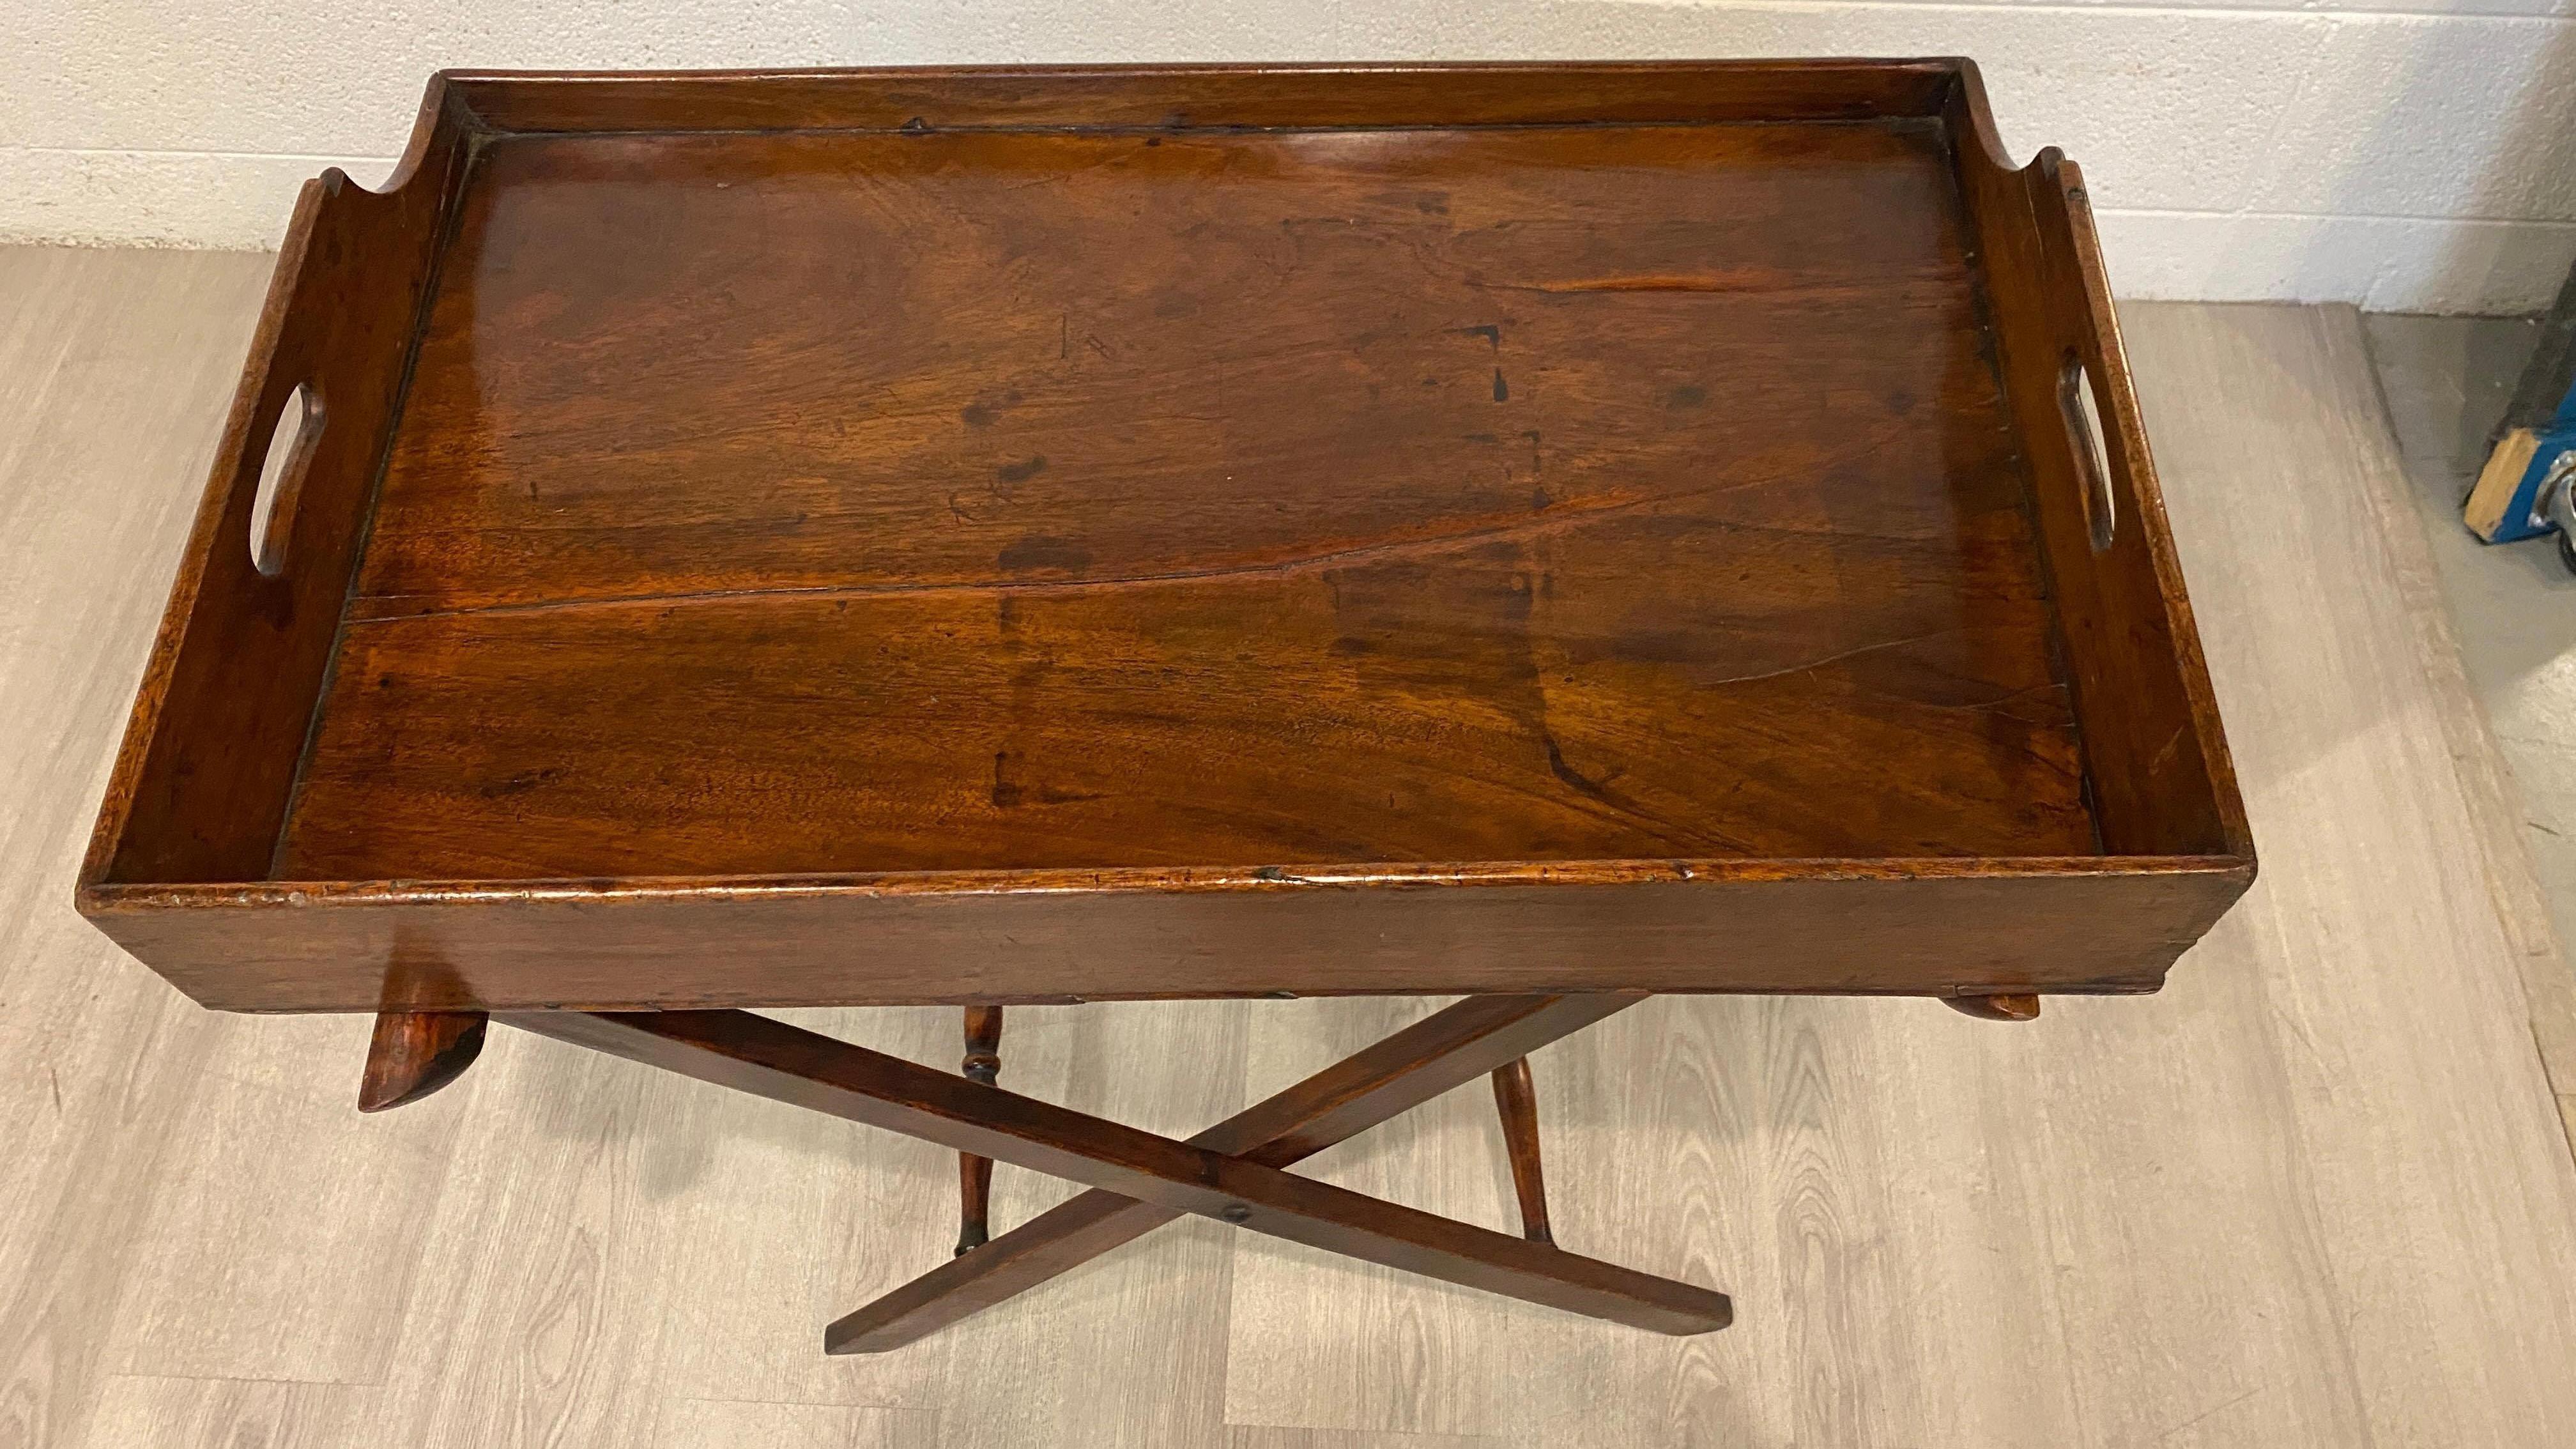 Made not in the last century,  but the century before that one, this butlers tray serving table is a truly wonderful example of understated elegance.
Crafted likely of mahogany in the traditional way with solid structure and the flexibility and